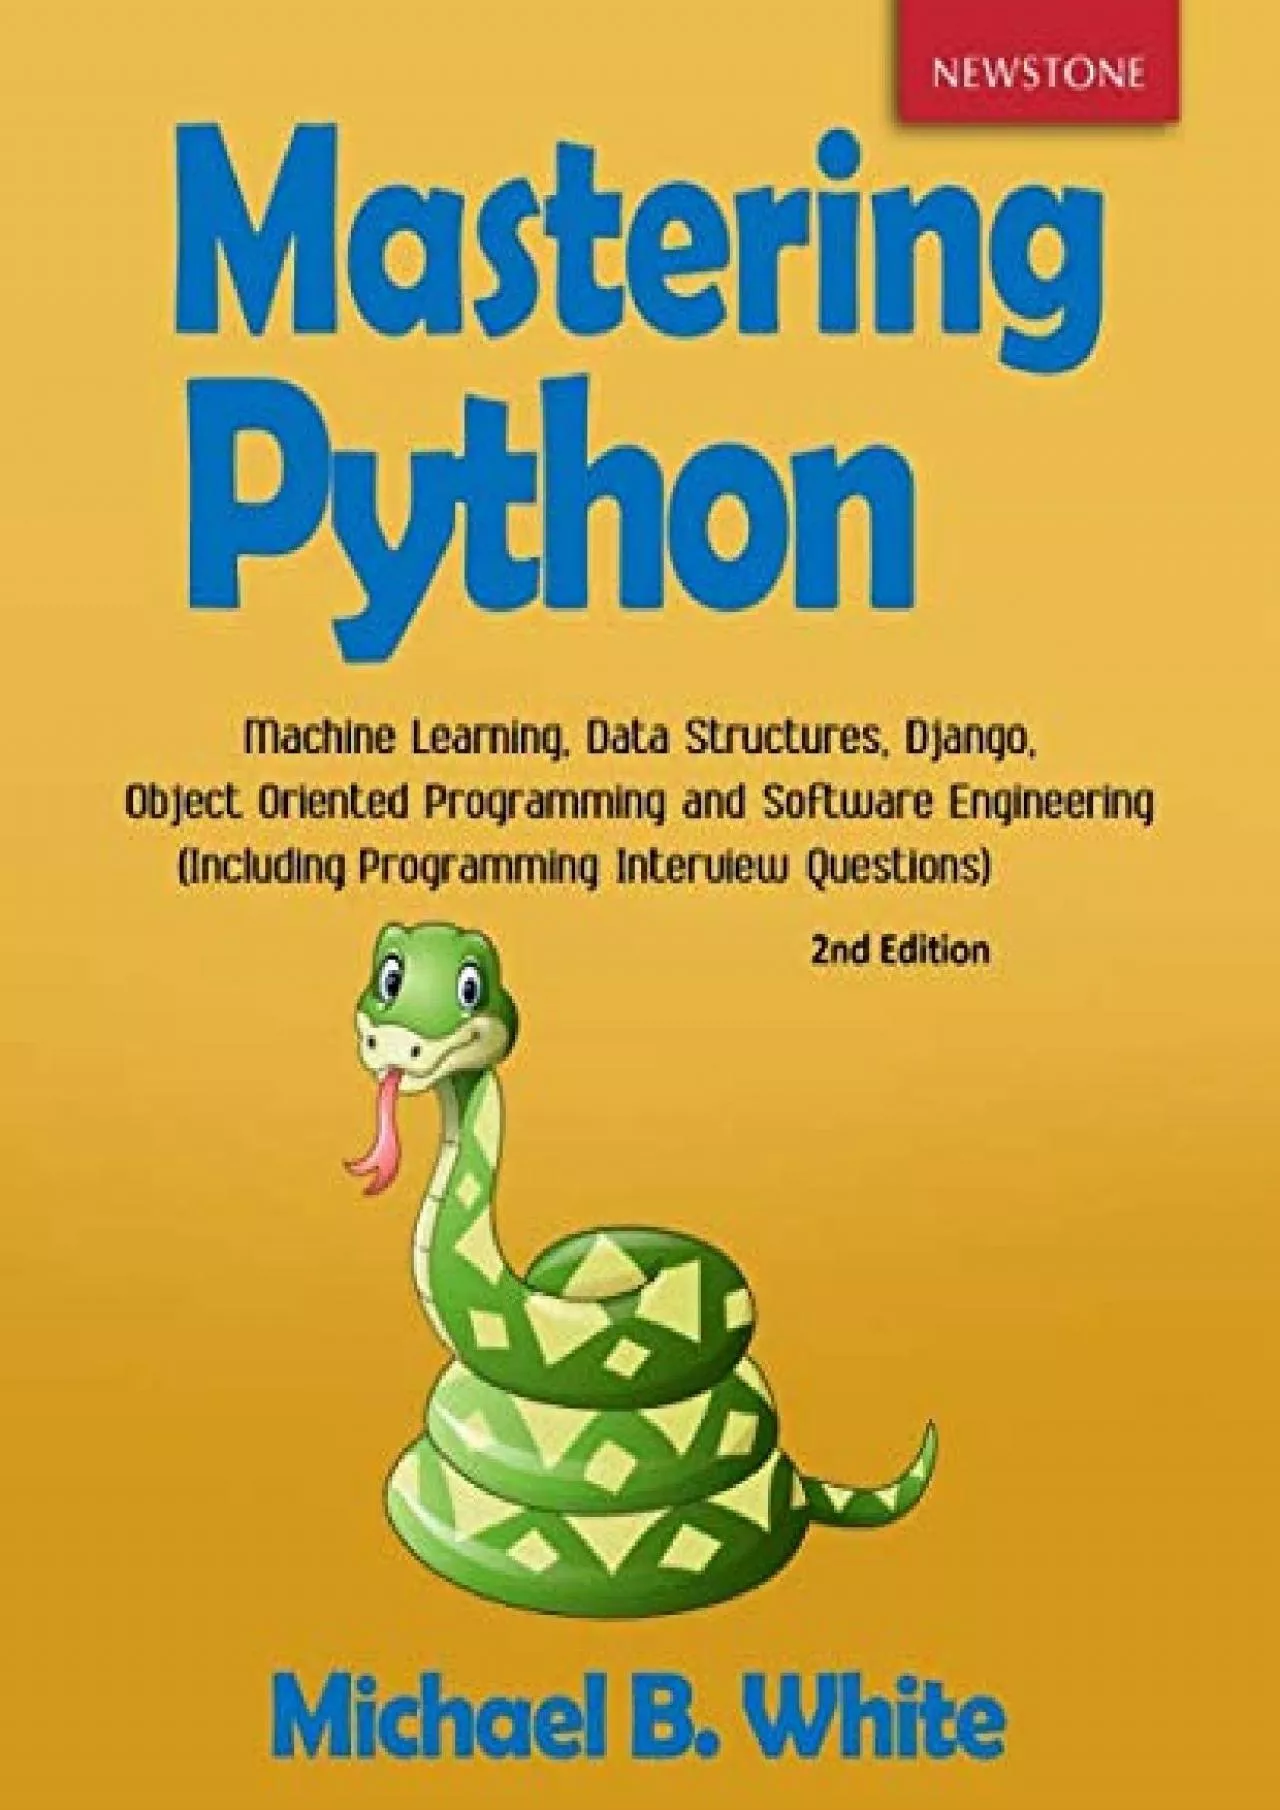 [BEST]-Mastering Python Machine Learning, Data Structures, Django, Object Oriented Programming